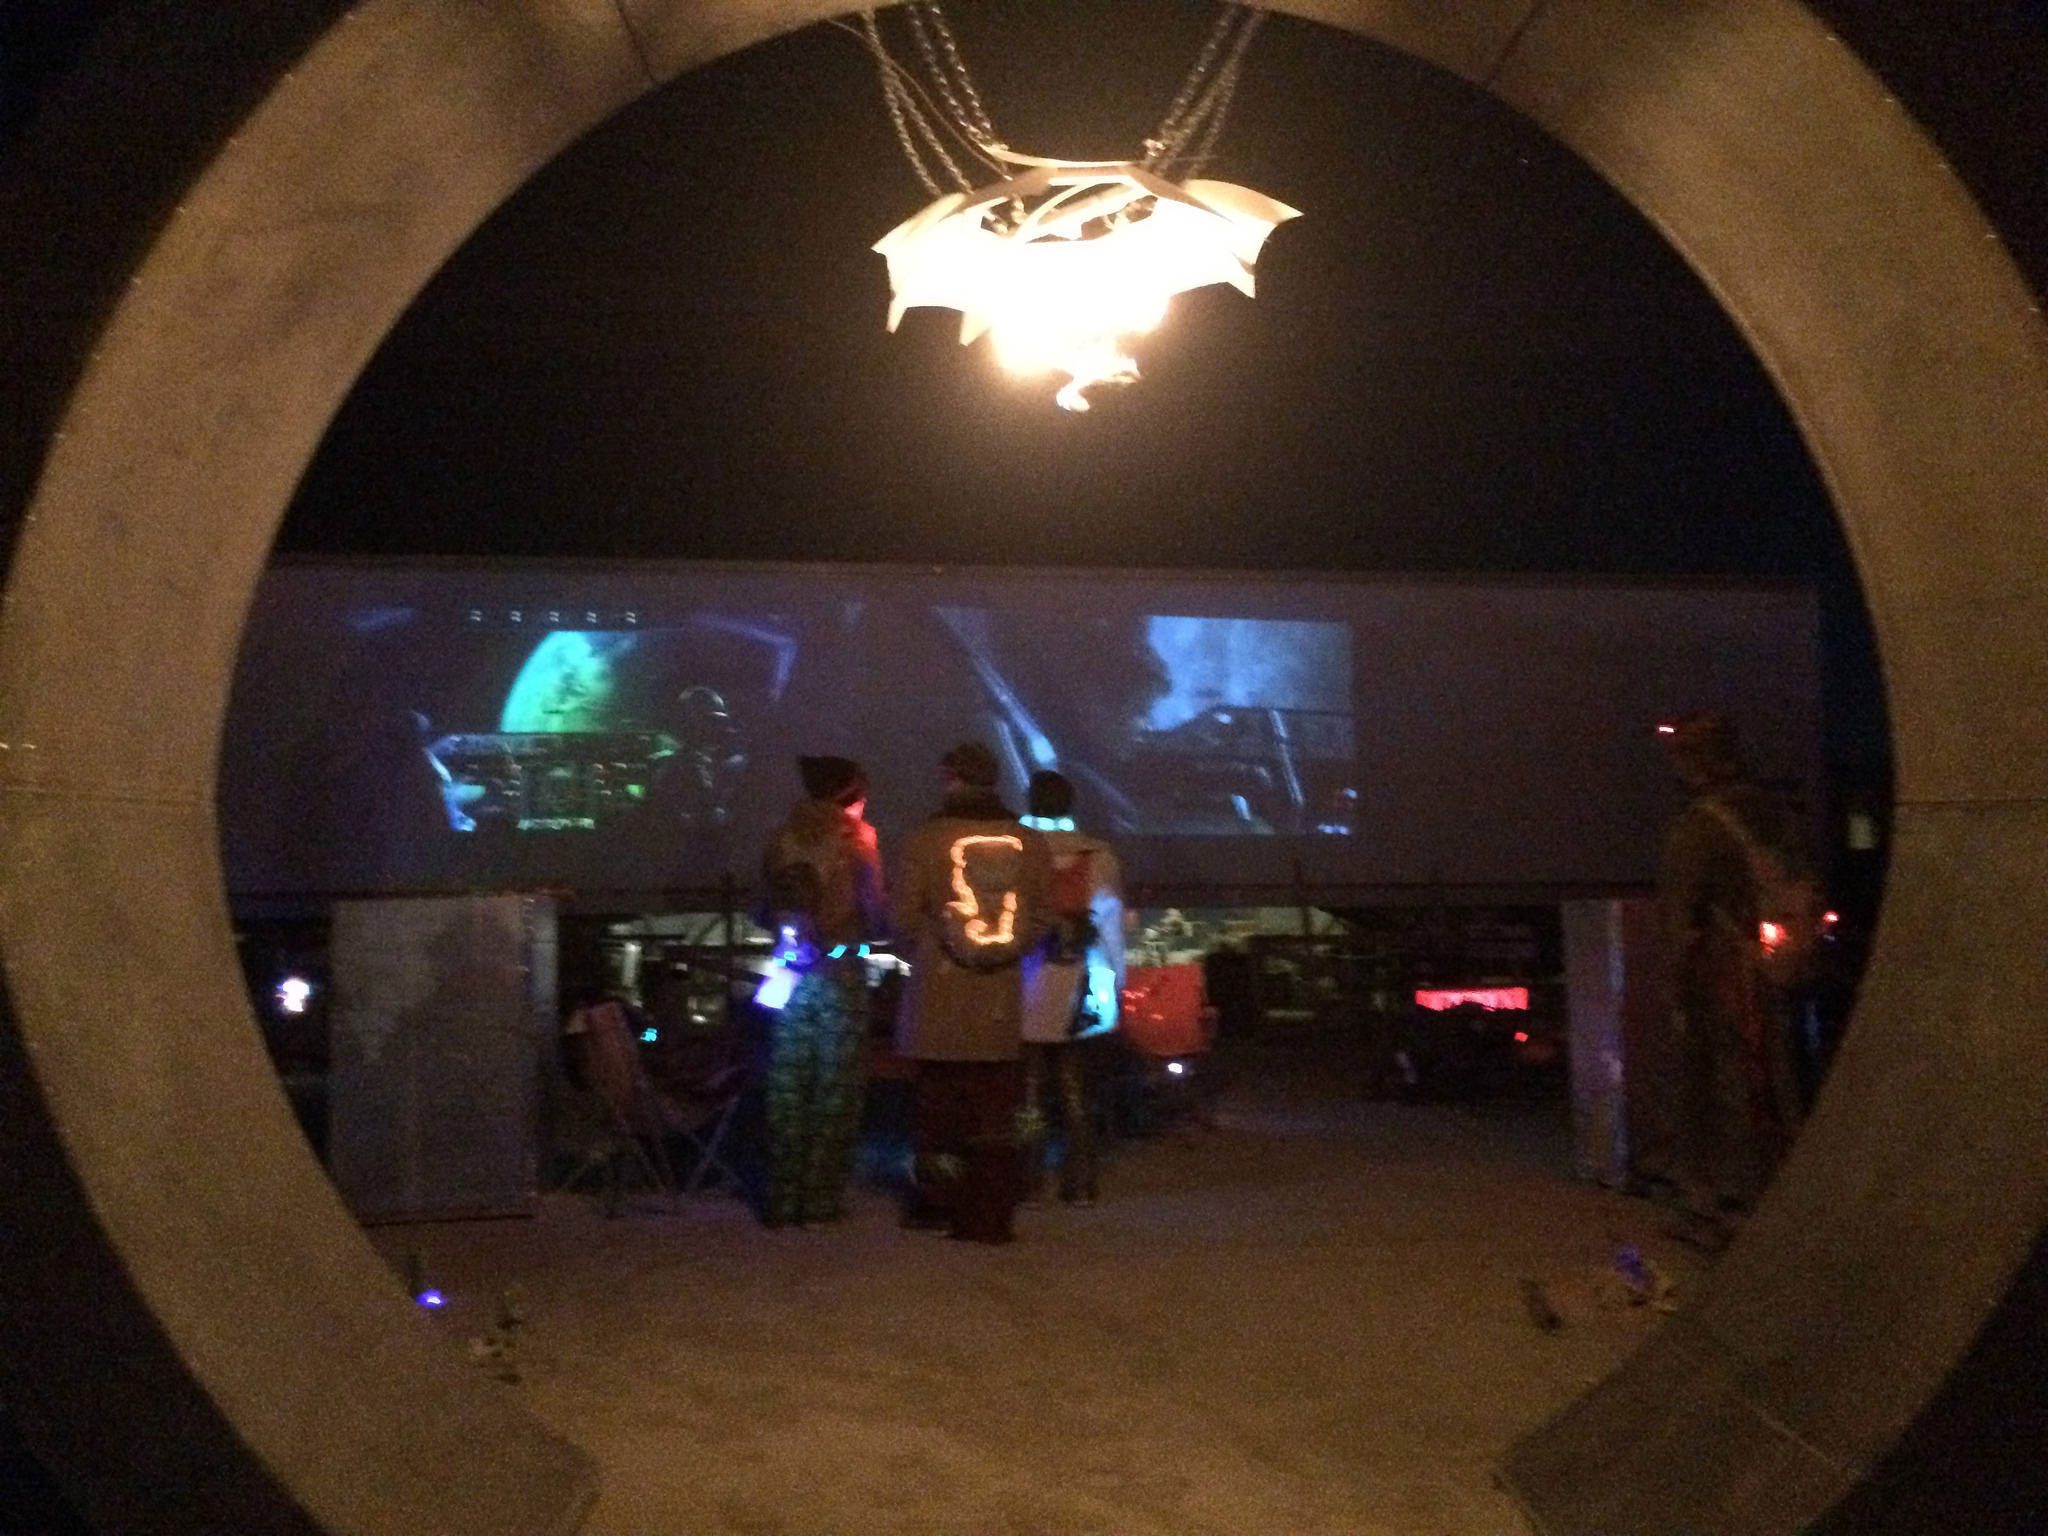 Moon Gate in front of movies